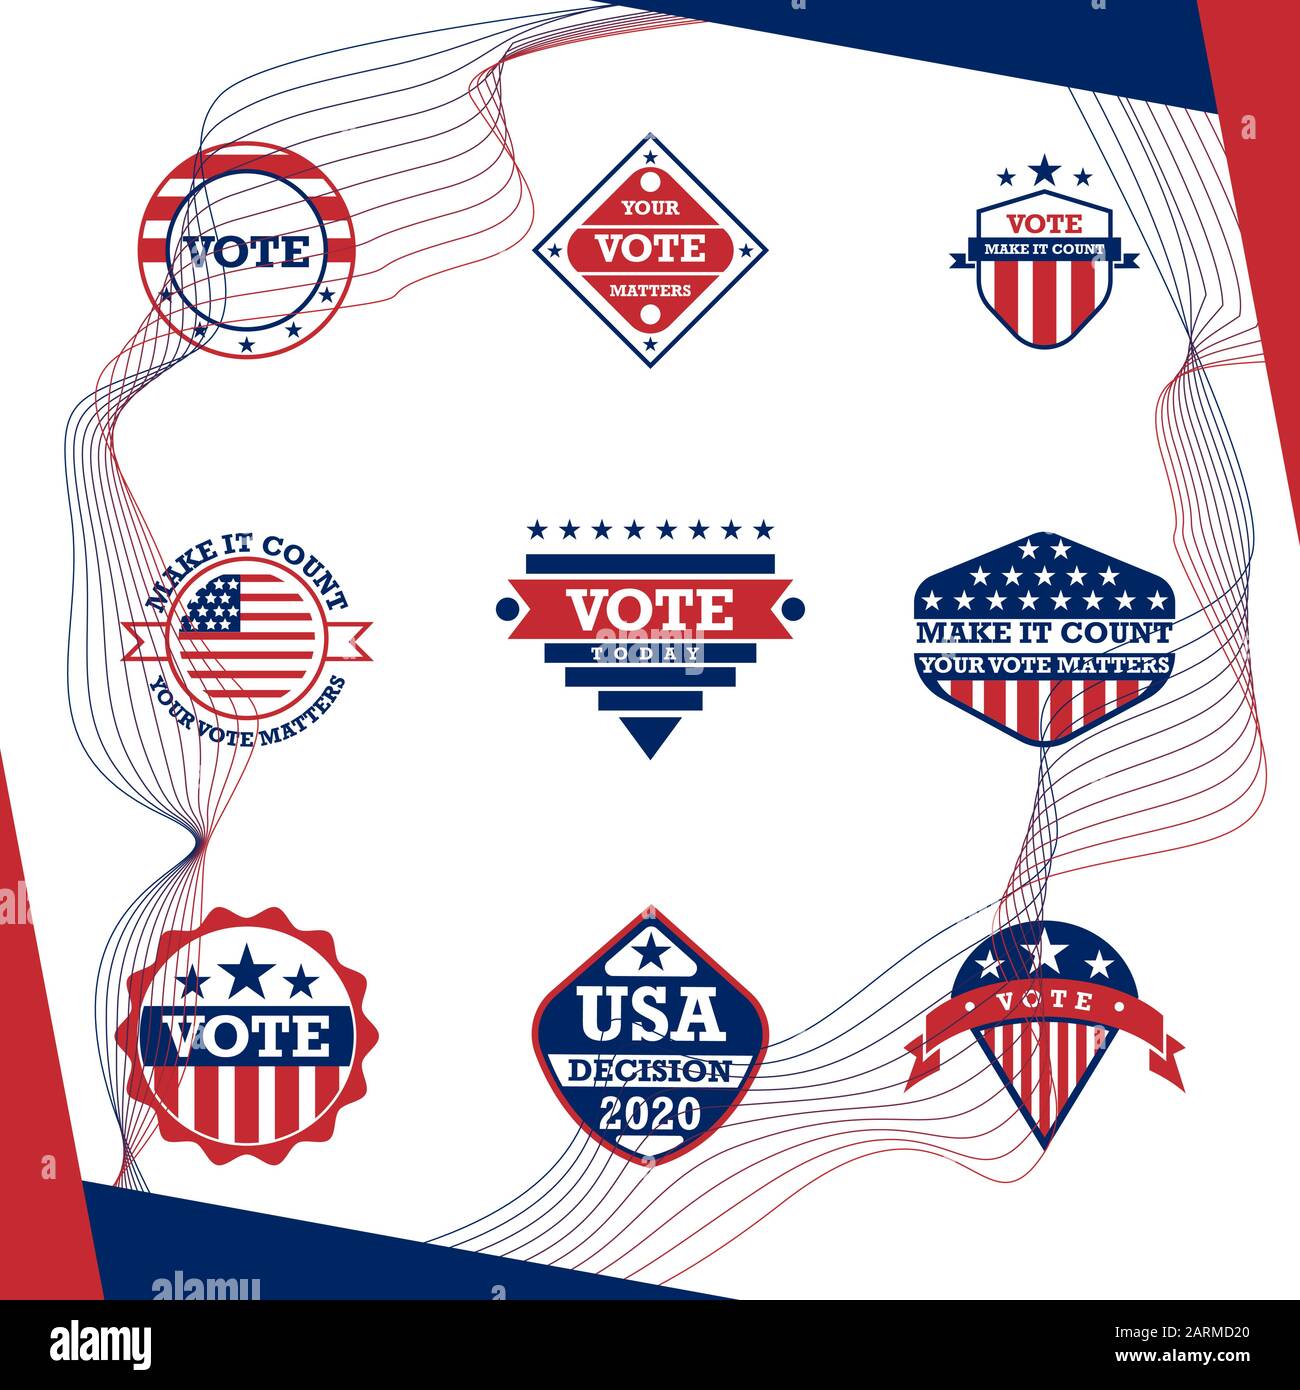 2020 United States of America Presidential Election Button Design, badges and vote labels. Stock Vector